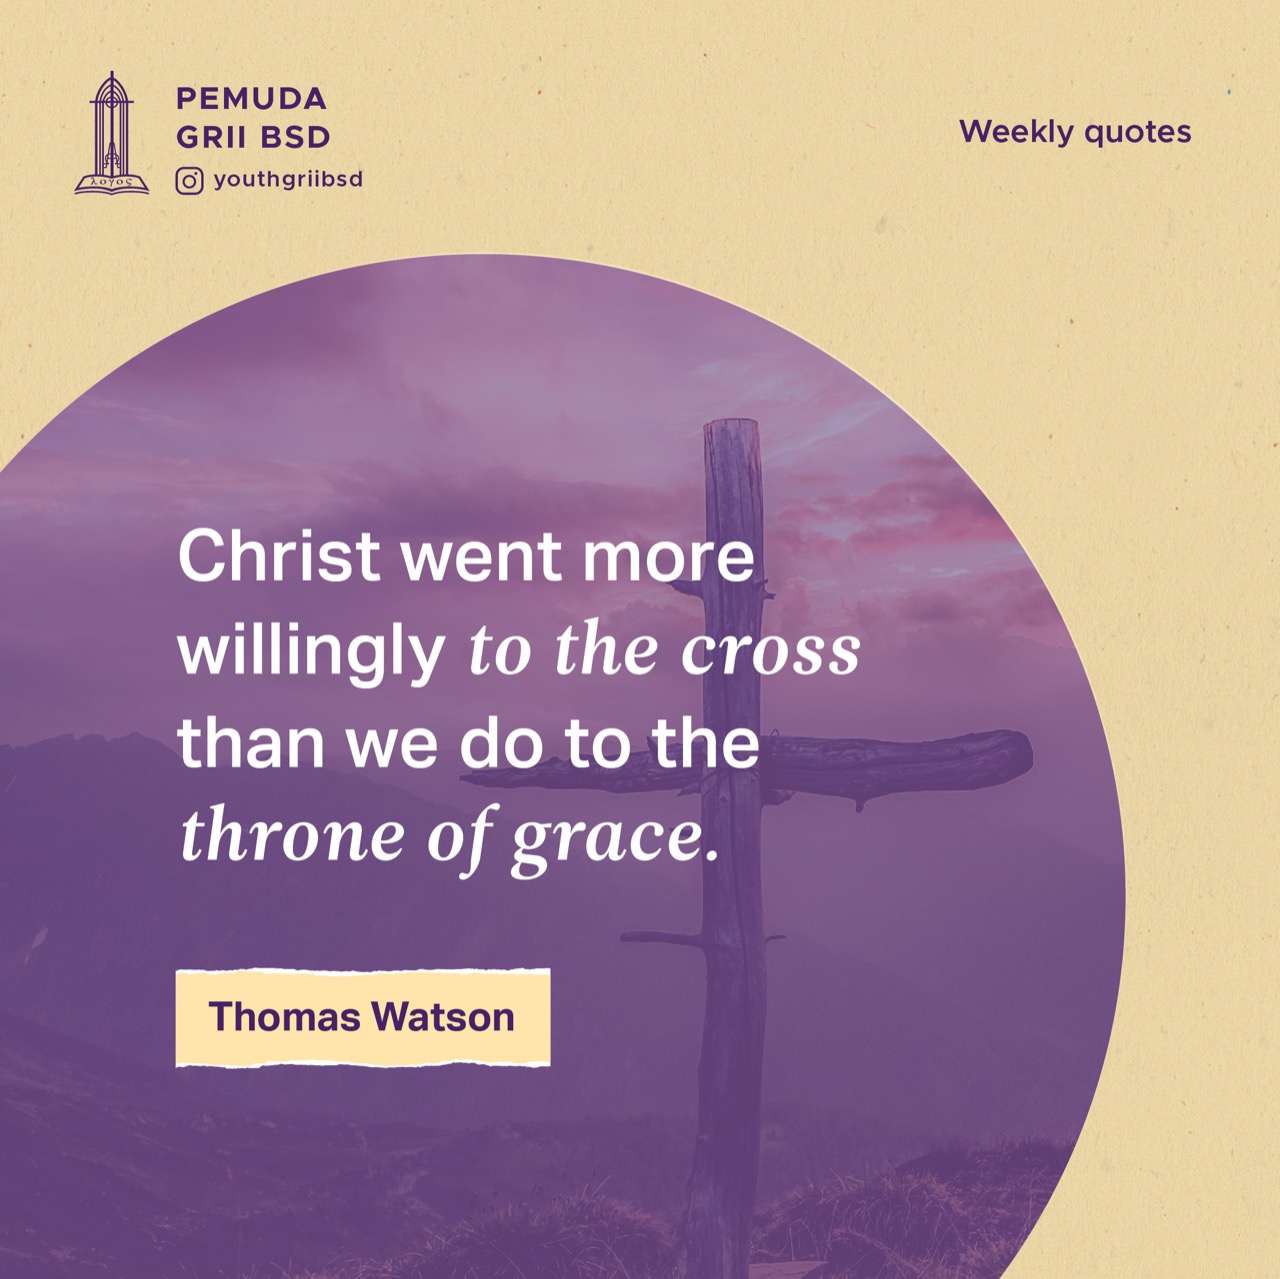 Christ went more willingly to the cross than we do to the throne of grace.